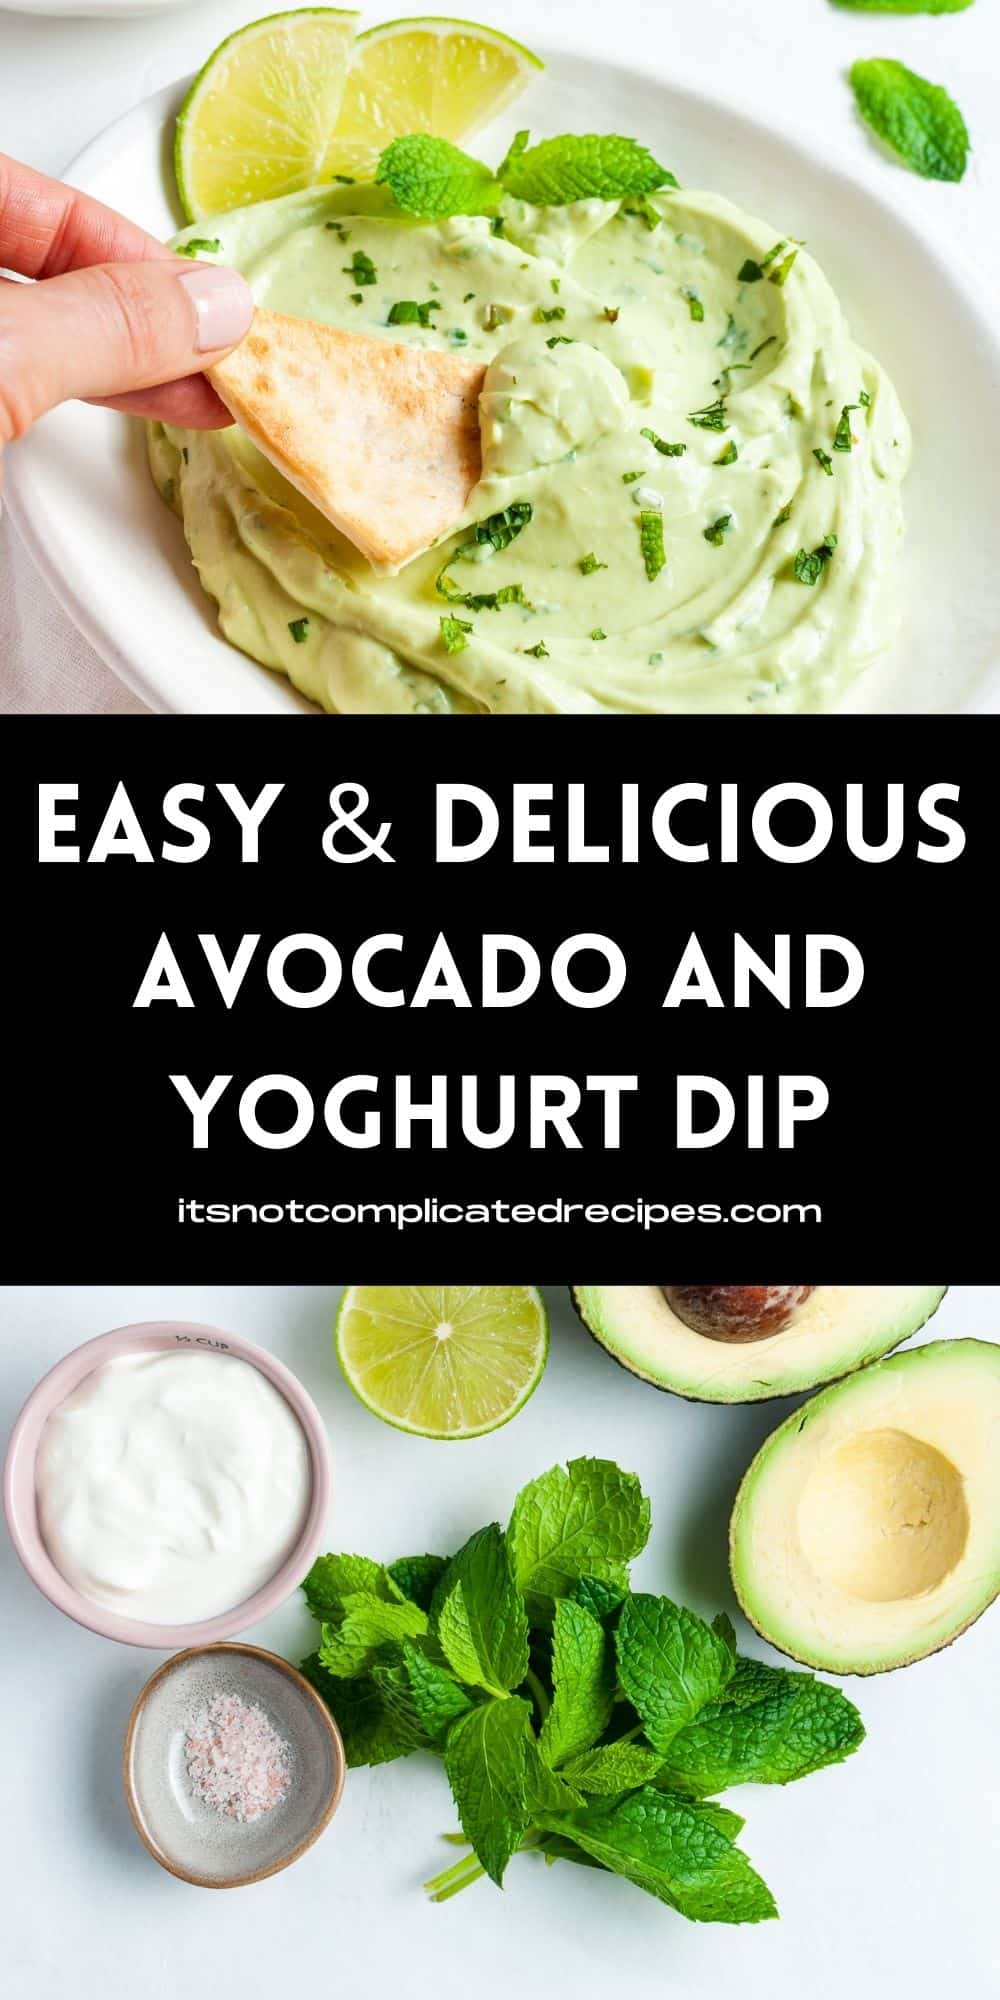 Avocado, Yoghurt and Mint Dip - It's Not Complicated Recipes